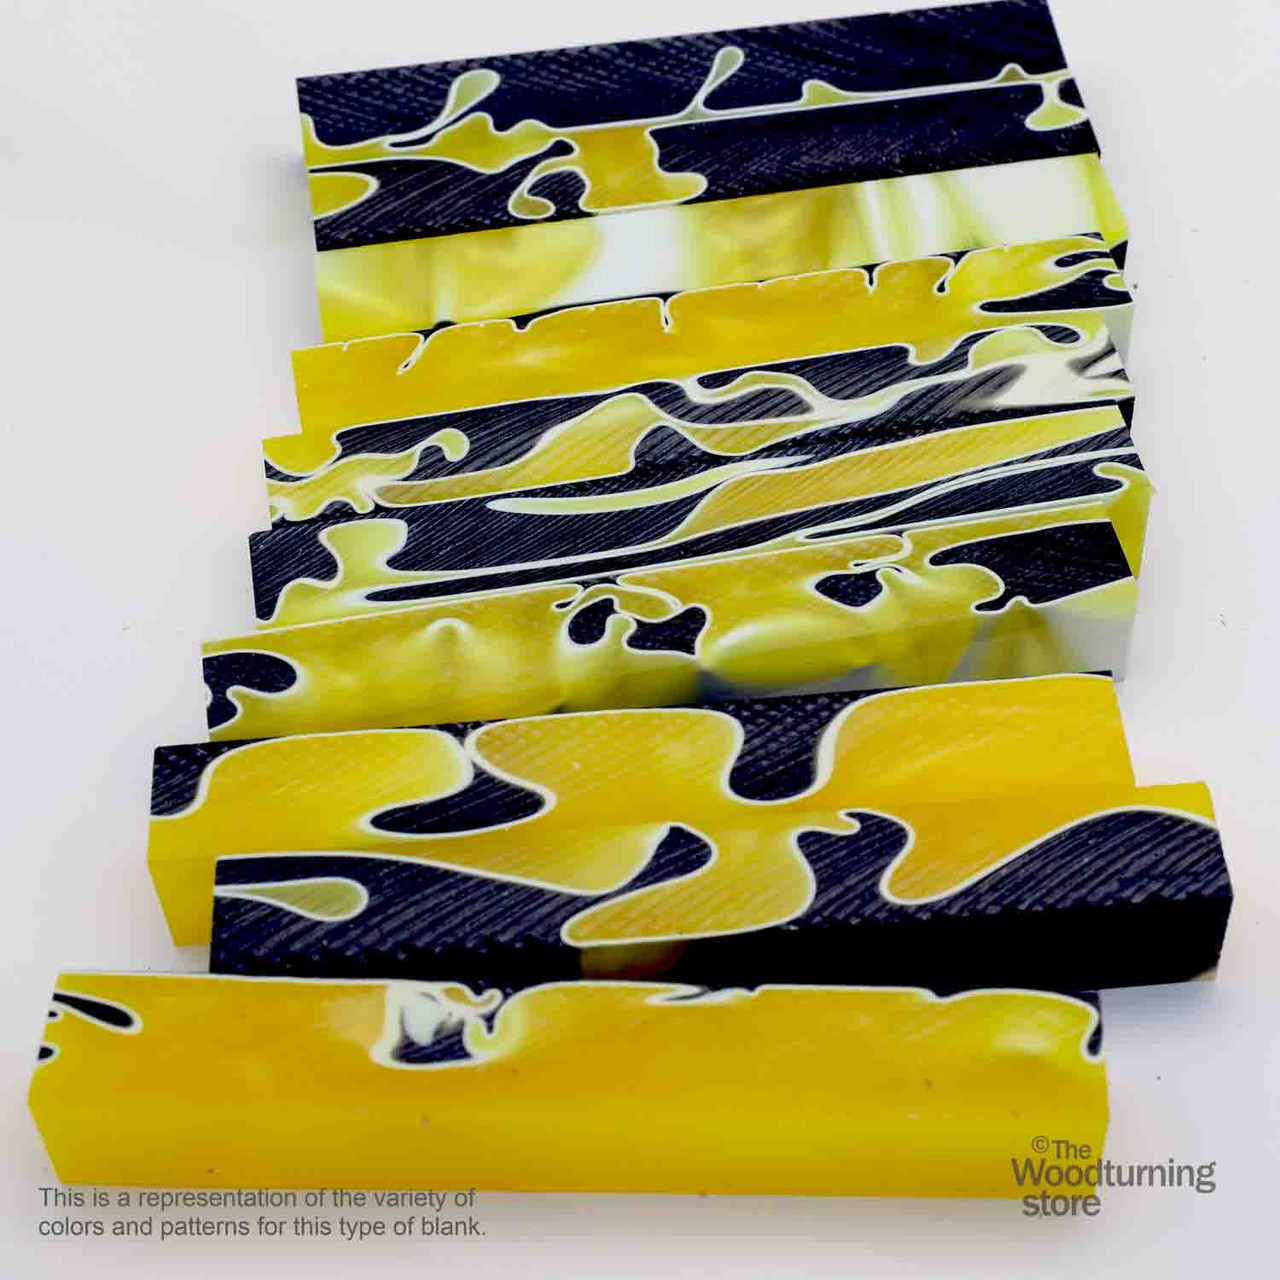 Legacy Acrylic Pen Blank, Bright Yellow and Black Swirl with White Lines